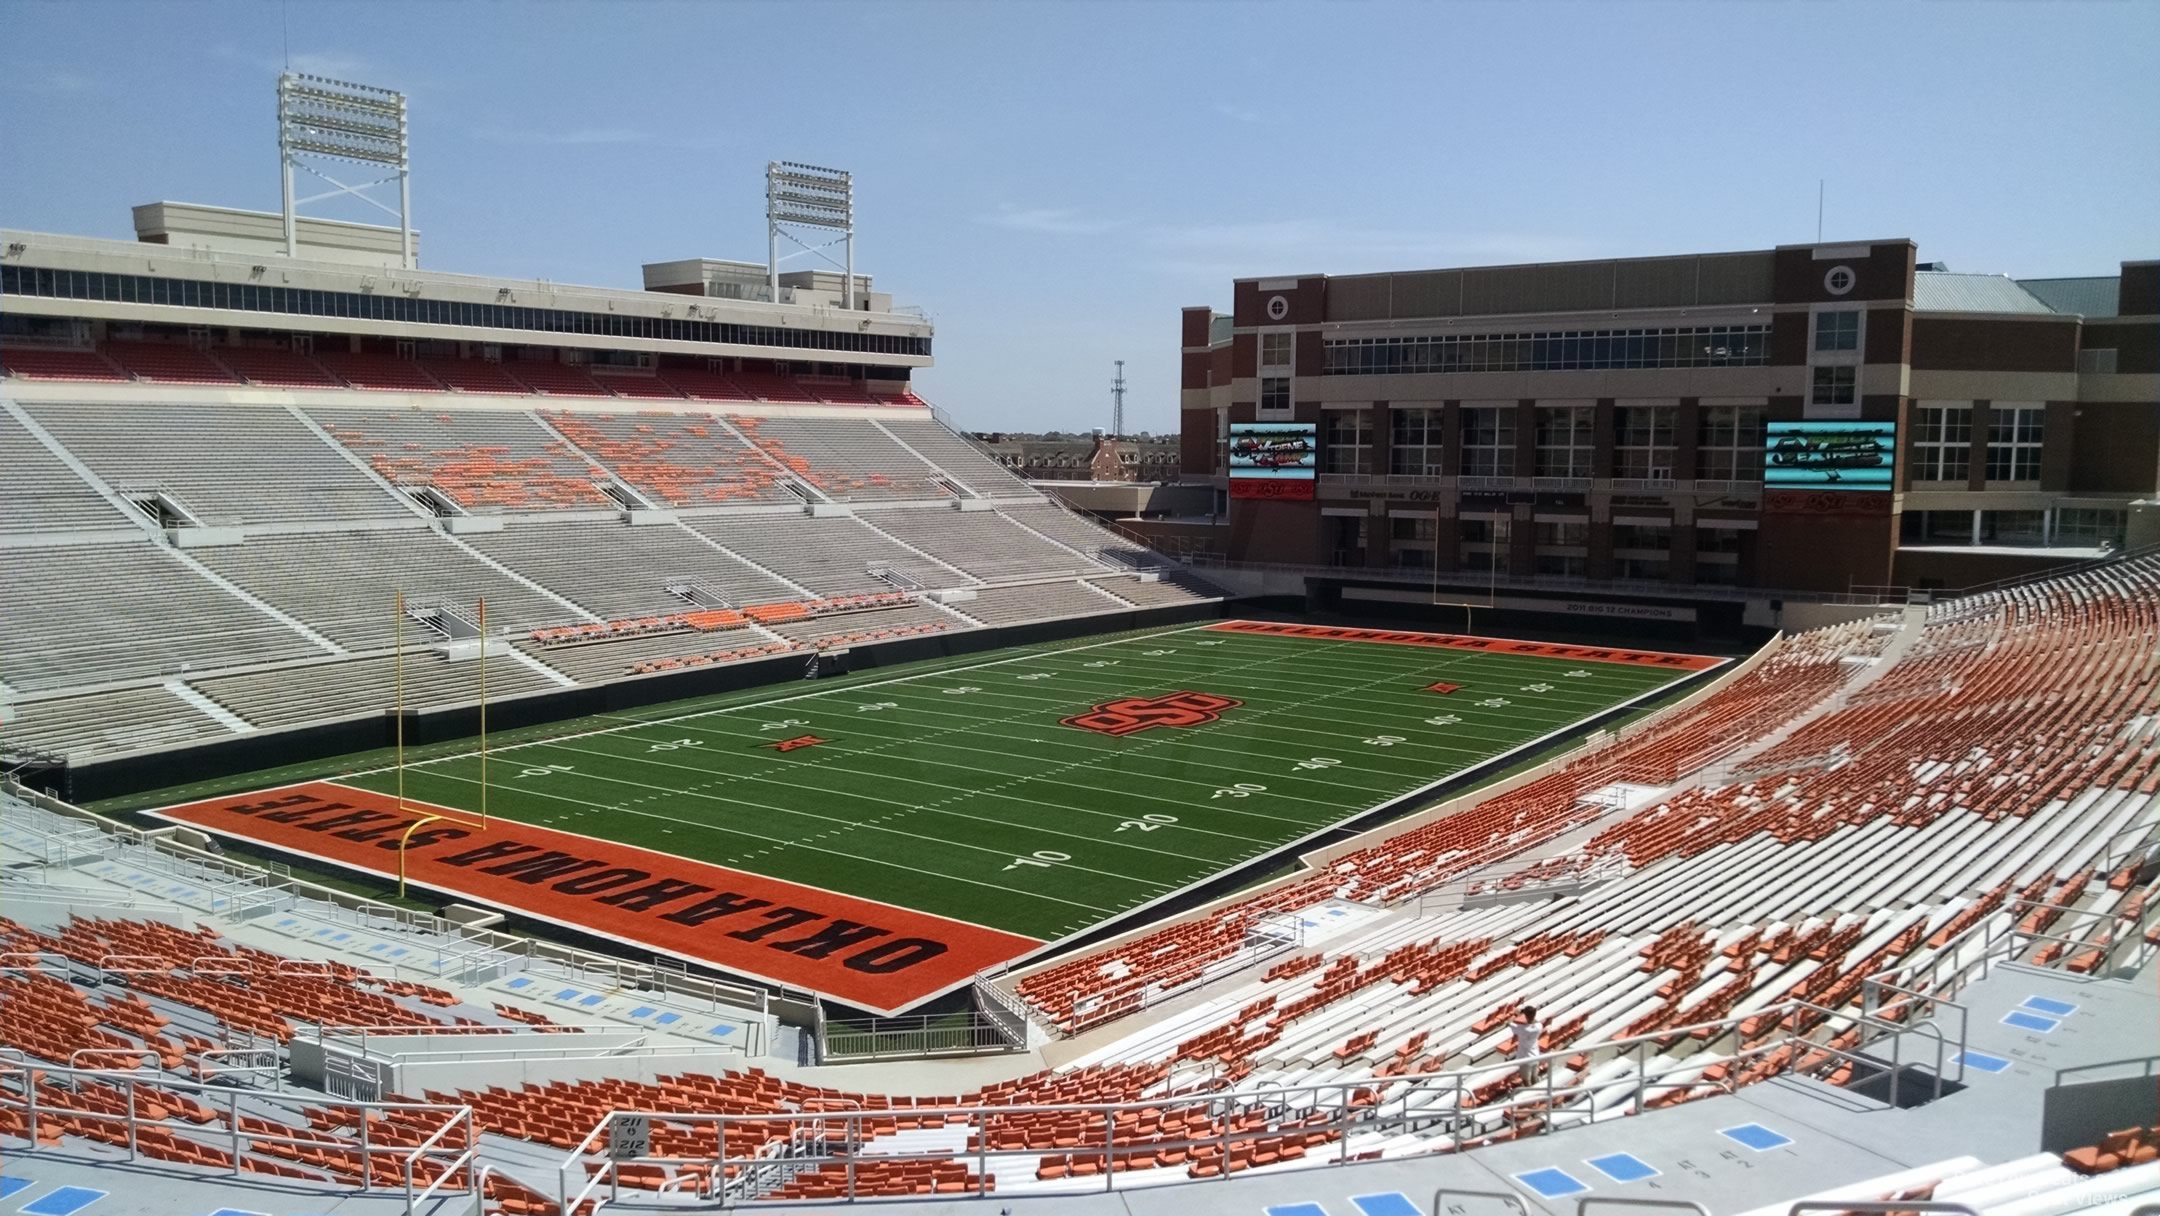 section 313, row 19 seat view  - boone pickens stadium